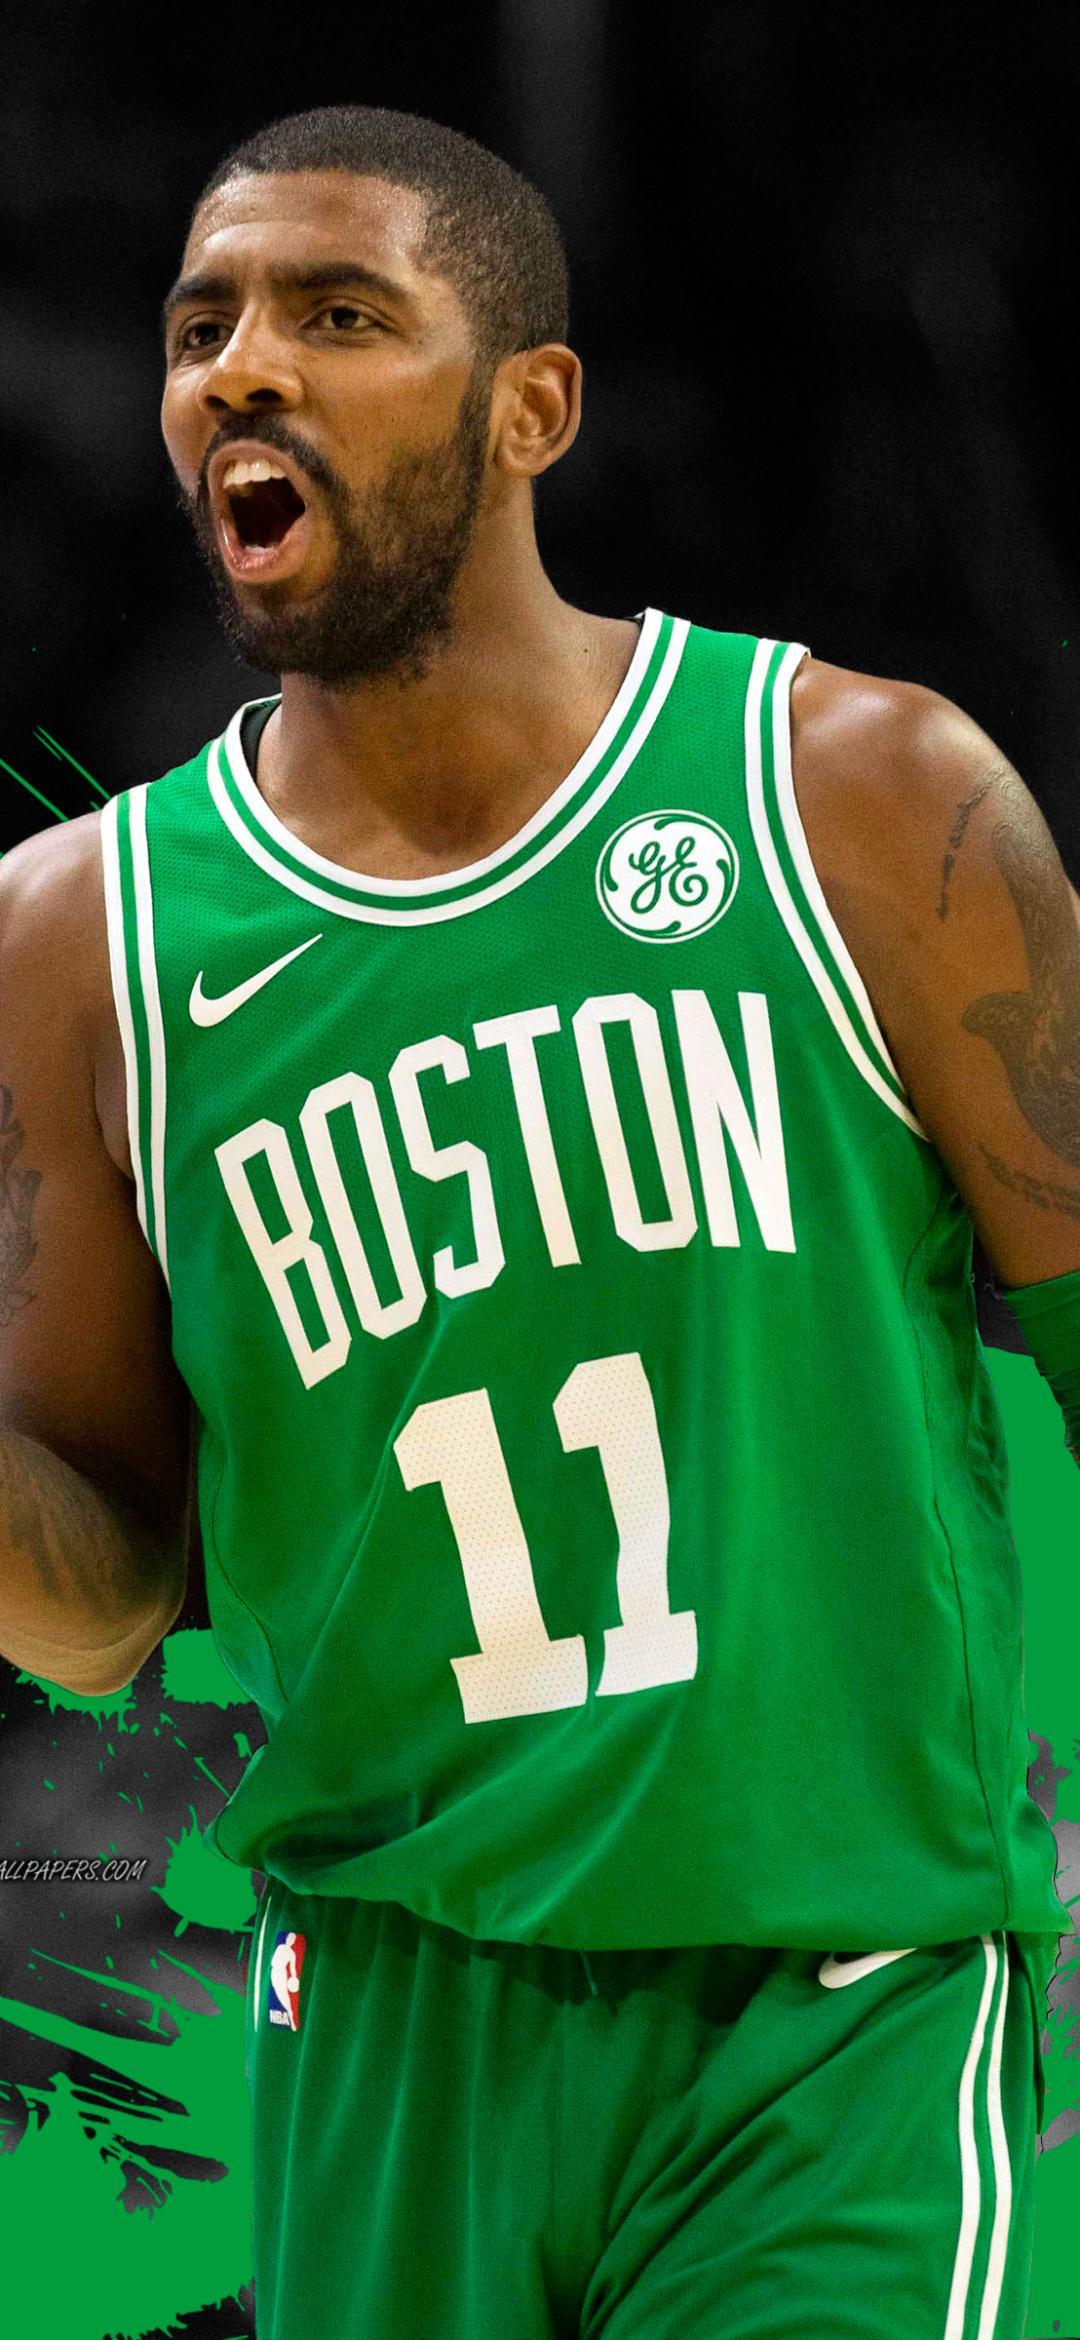 Sports Kyrie Irving (1080x2340) Wallpaper